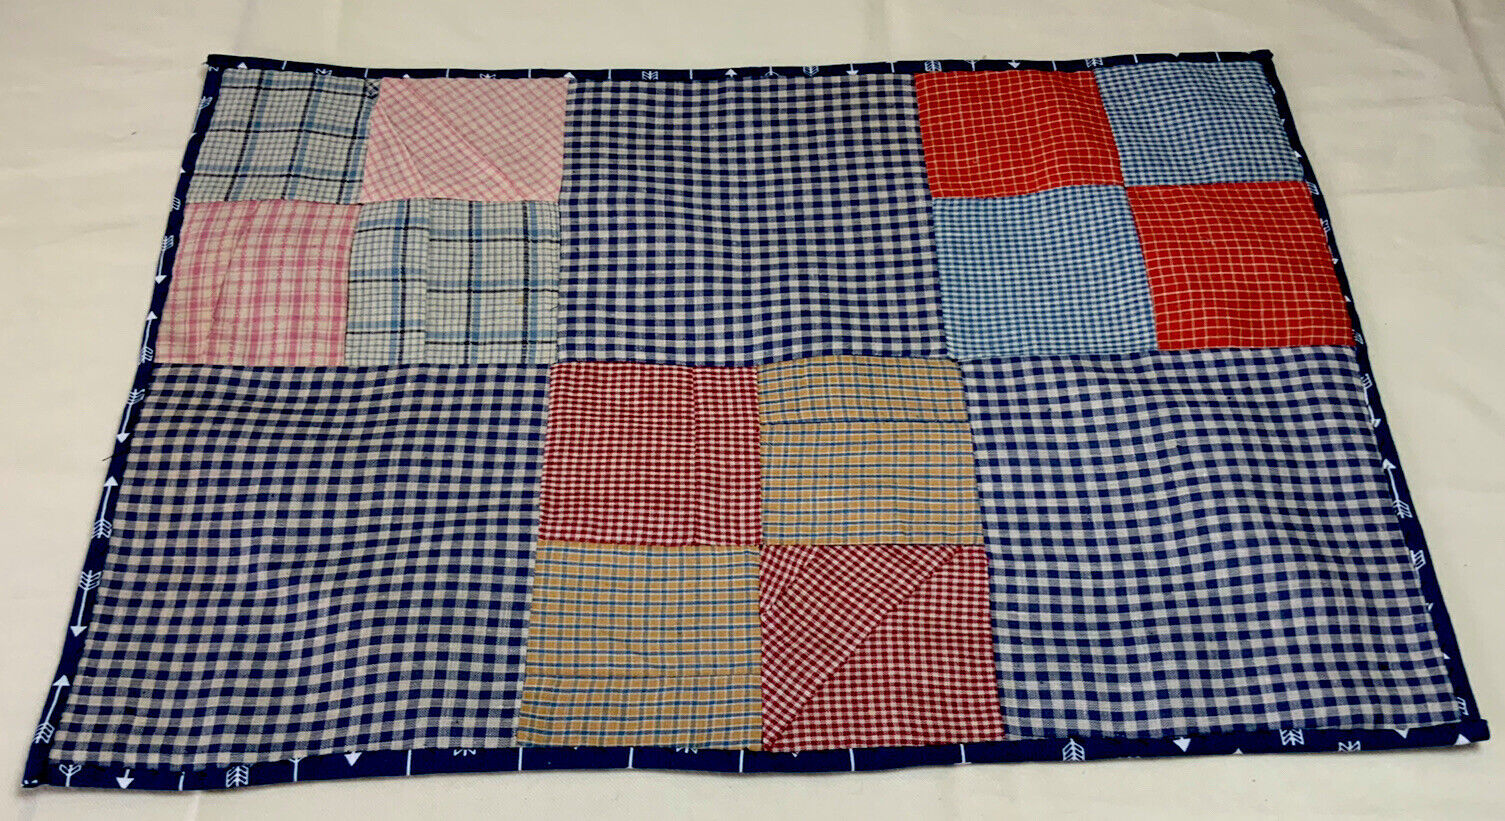 Antique Vintage Quilt Table Topper, Four Patch, Early Calico Checks, Blue, Multi